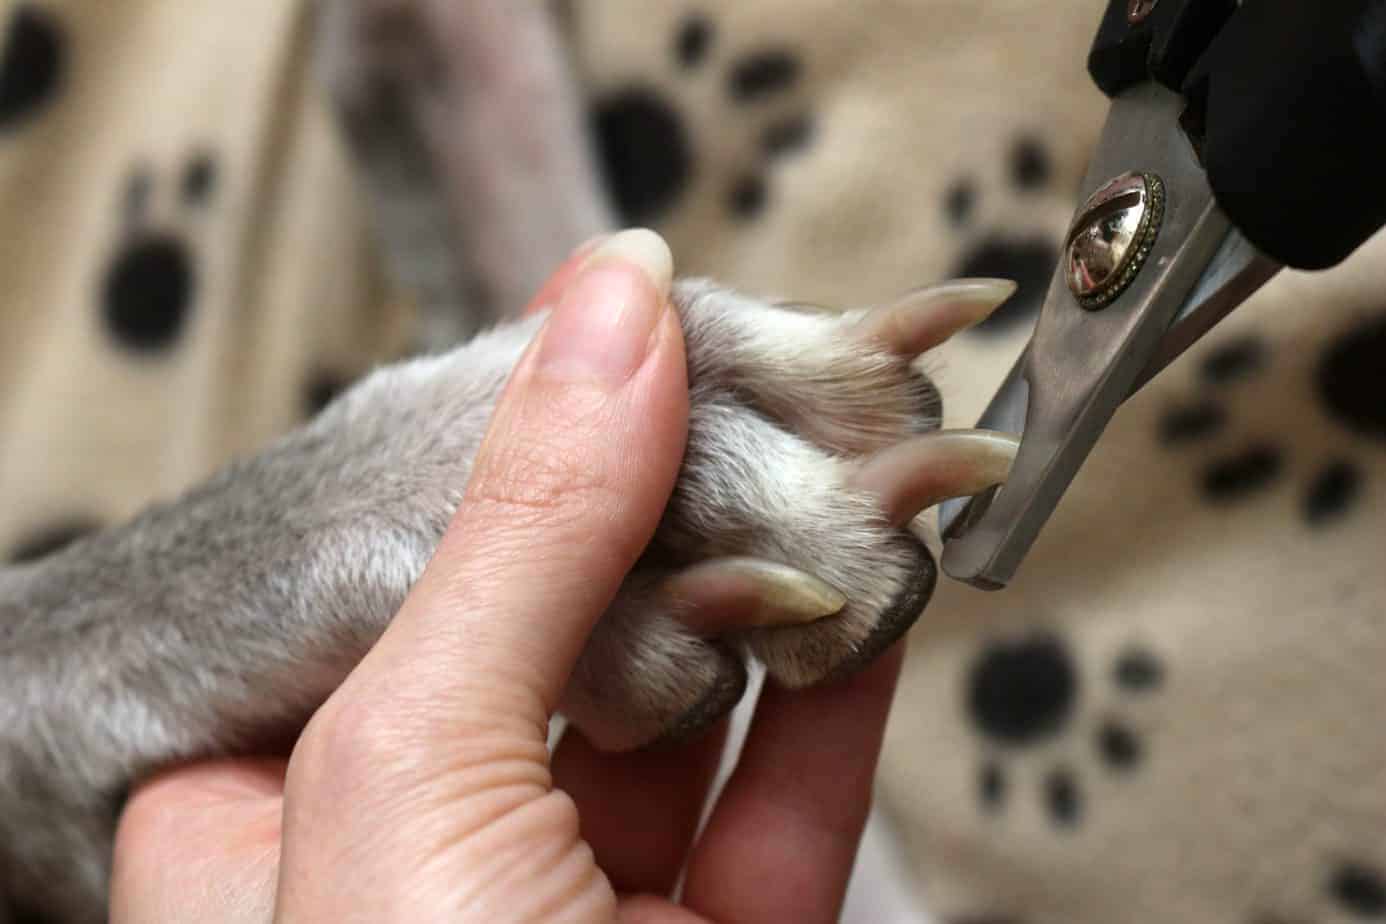 The Ultimate Hack To Safely Trim Your Dog’s Long Nails And Avoid Hurting Them!